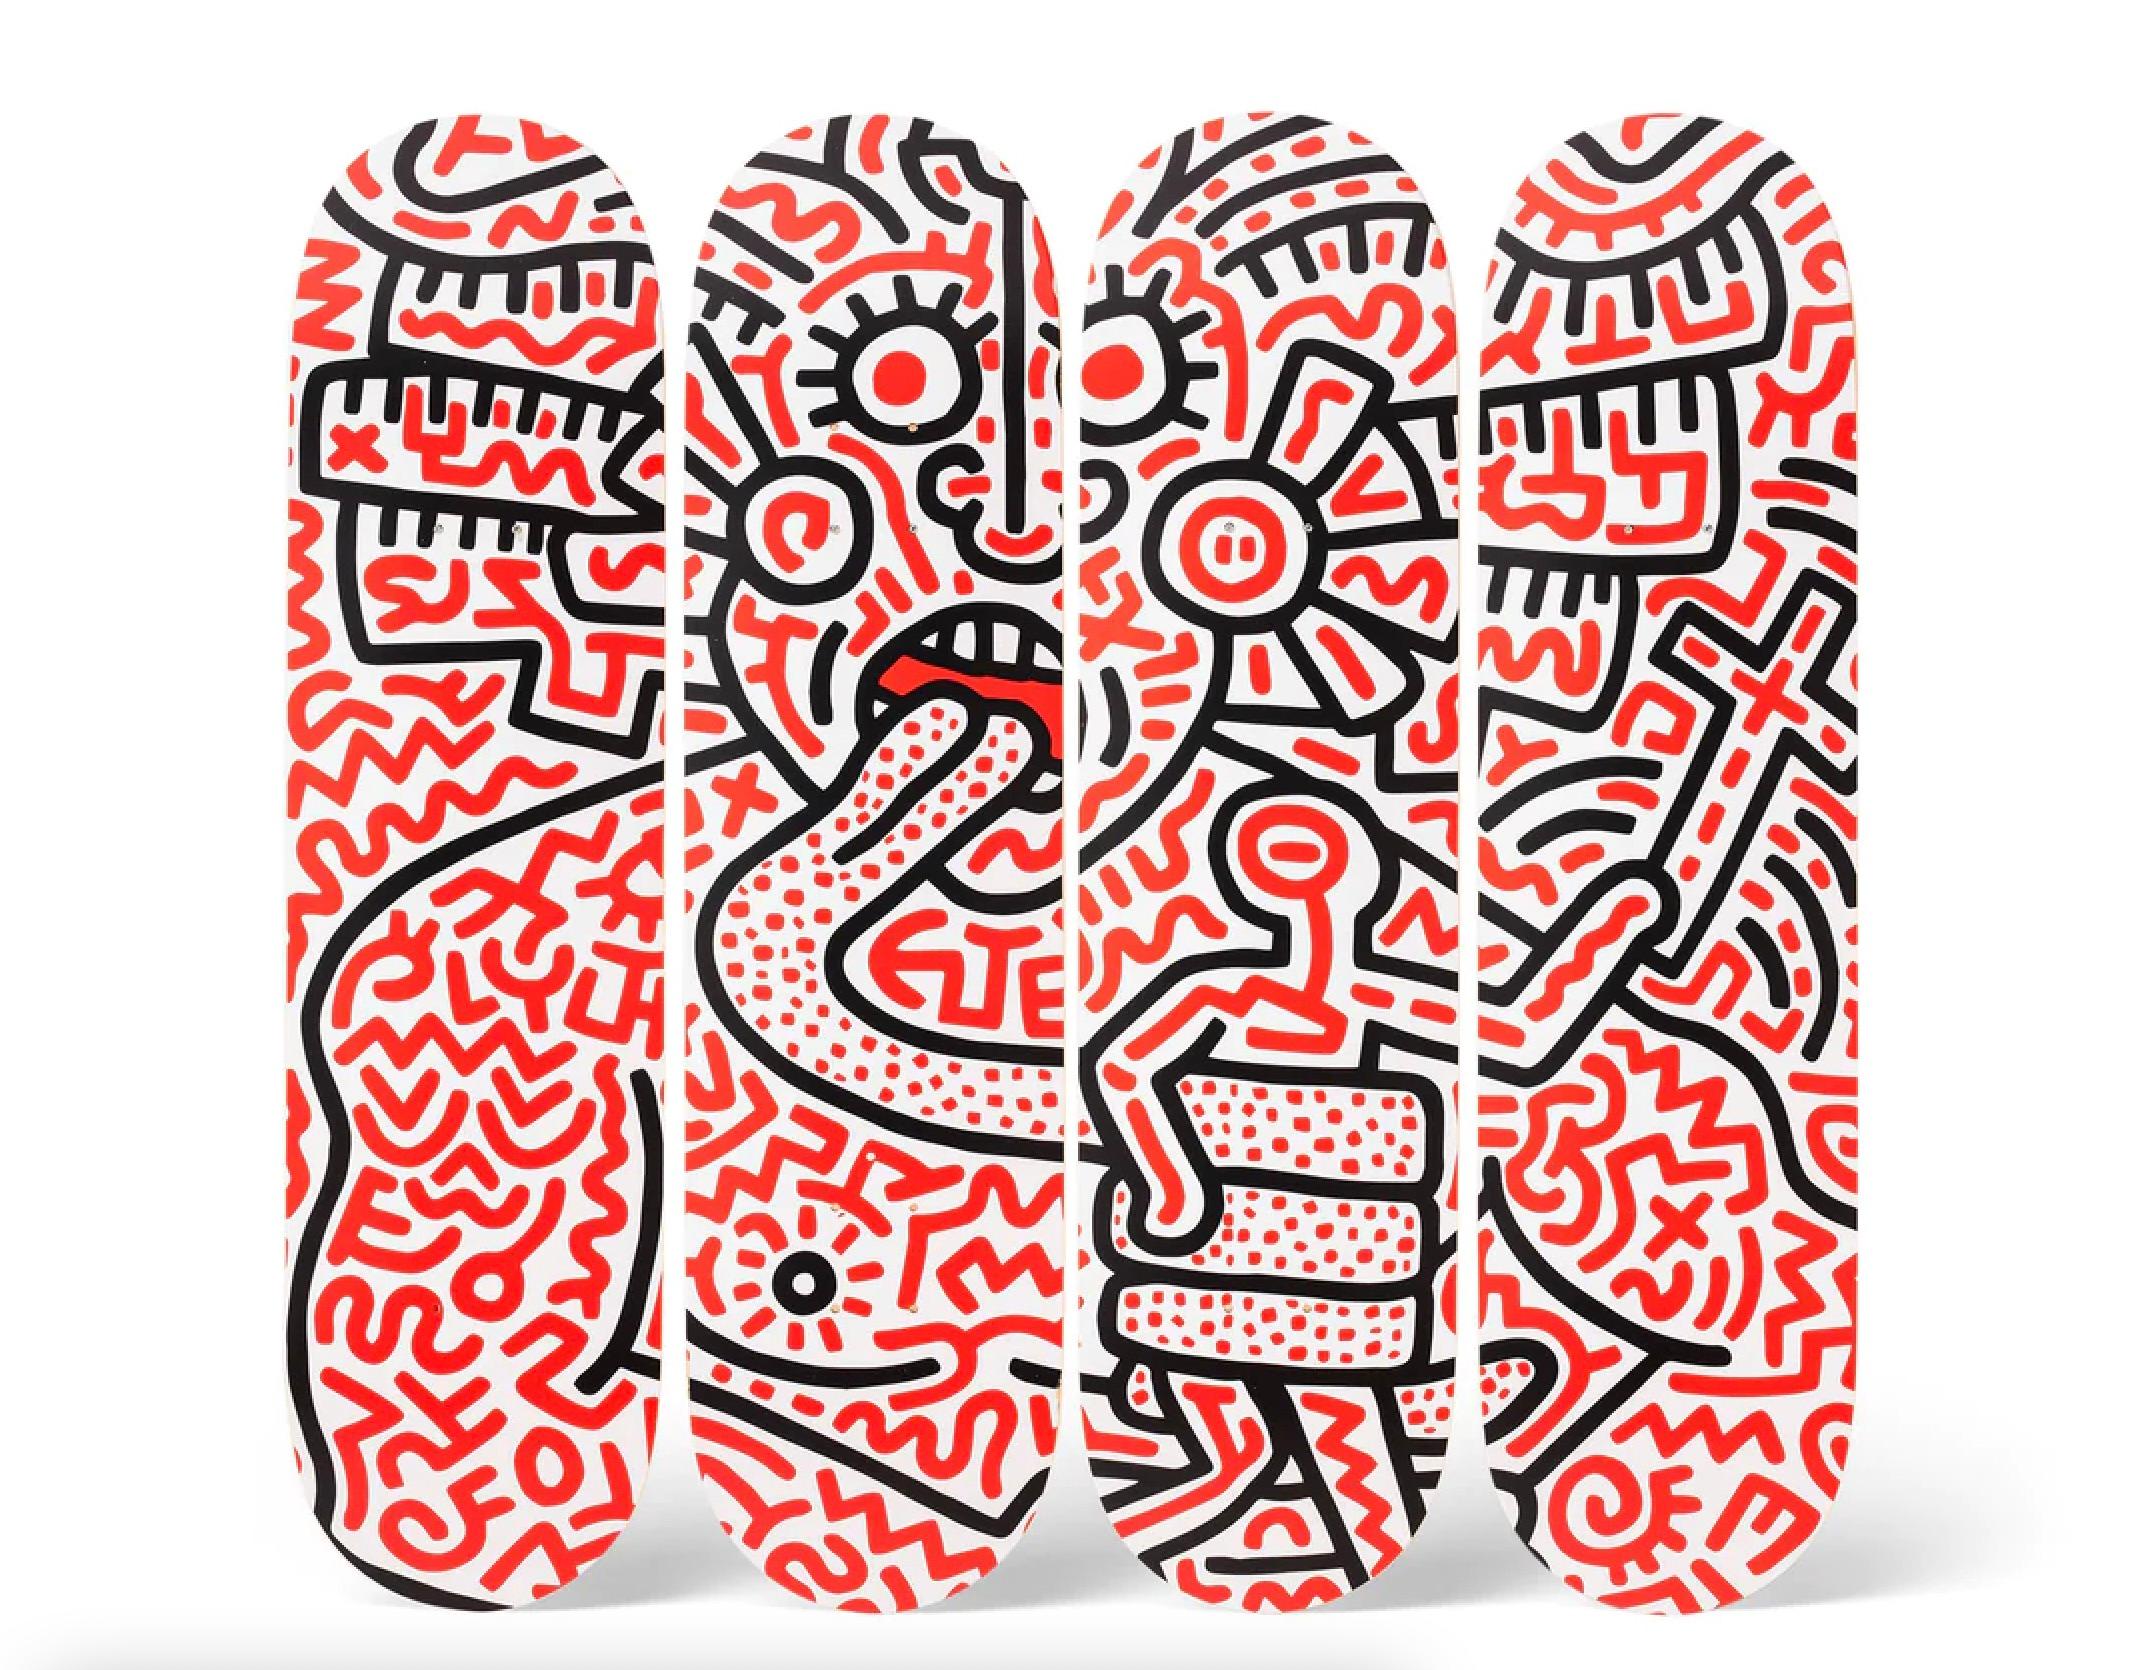 Keith Haring
Man and Medusa, 2018
Print on 7 ply Grade A Canadian Maple wood (Set of 4)
31 1/2 × 7 9/10 in  80 × 20 cm (each)
